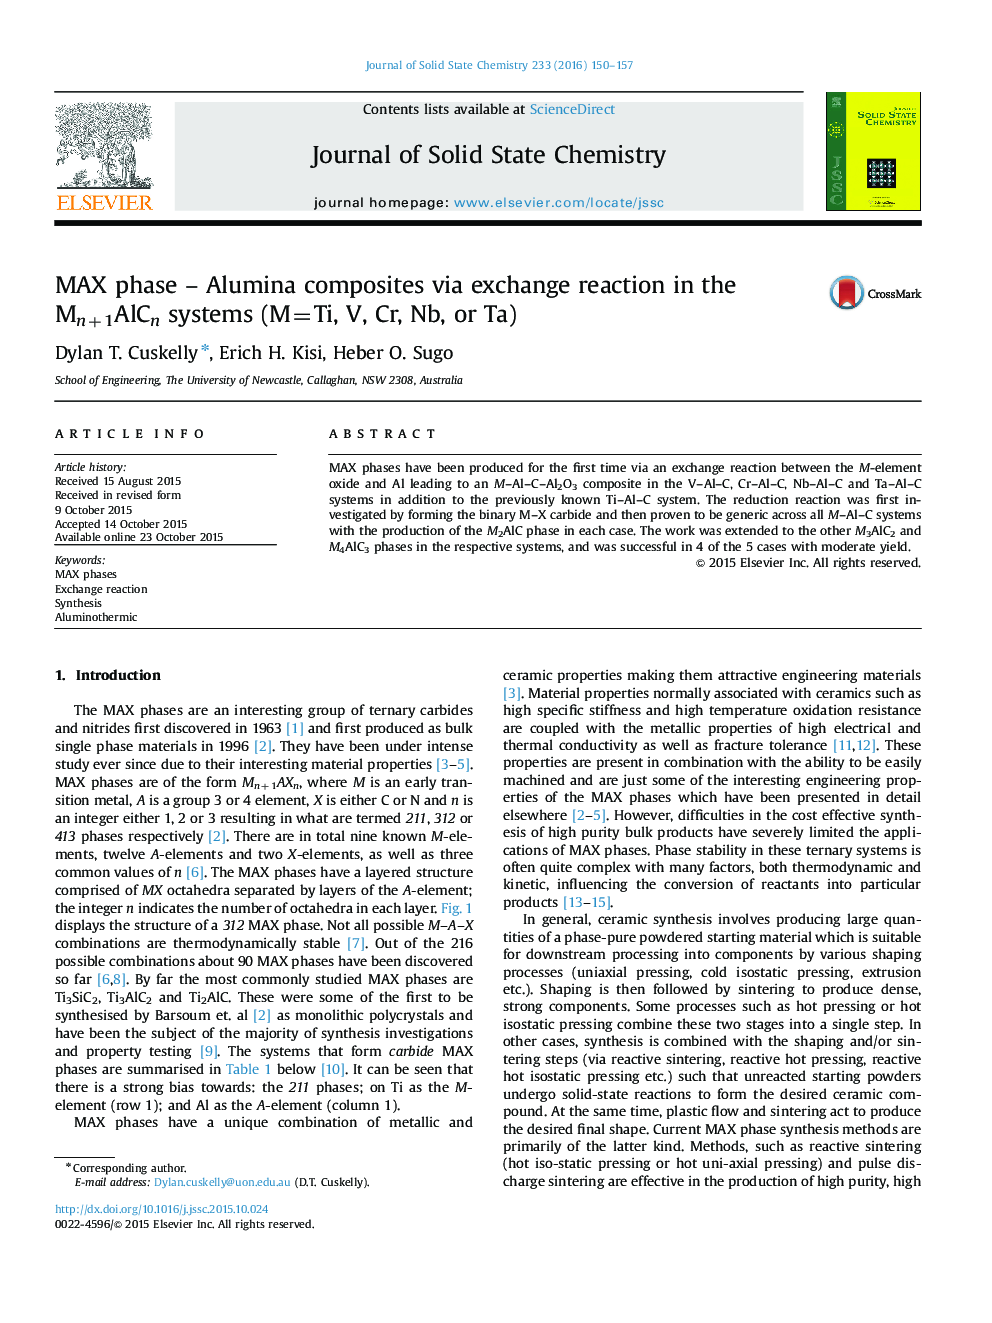 MAX phase – Alumina composites via exchange reaction in the Mn+1AlCn systems (M=Ti, V, Cr, Nb, or Ta)